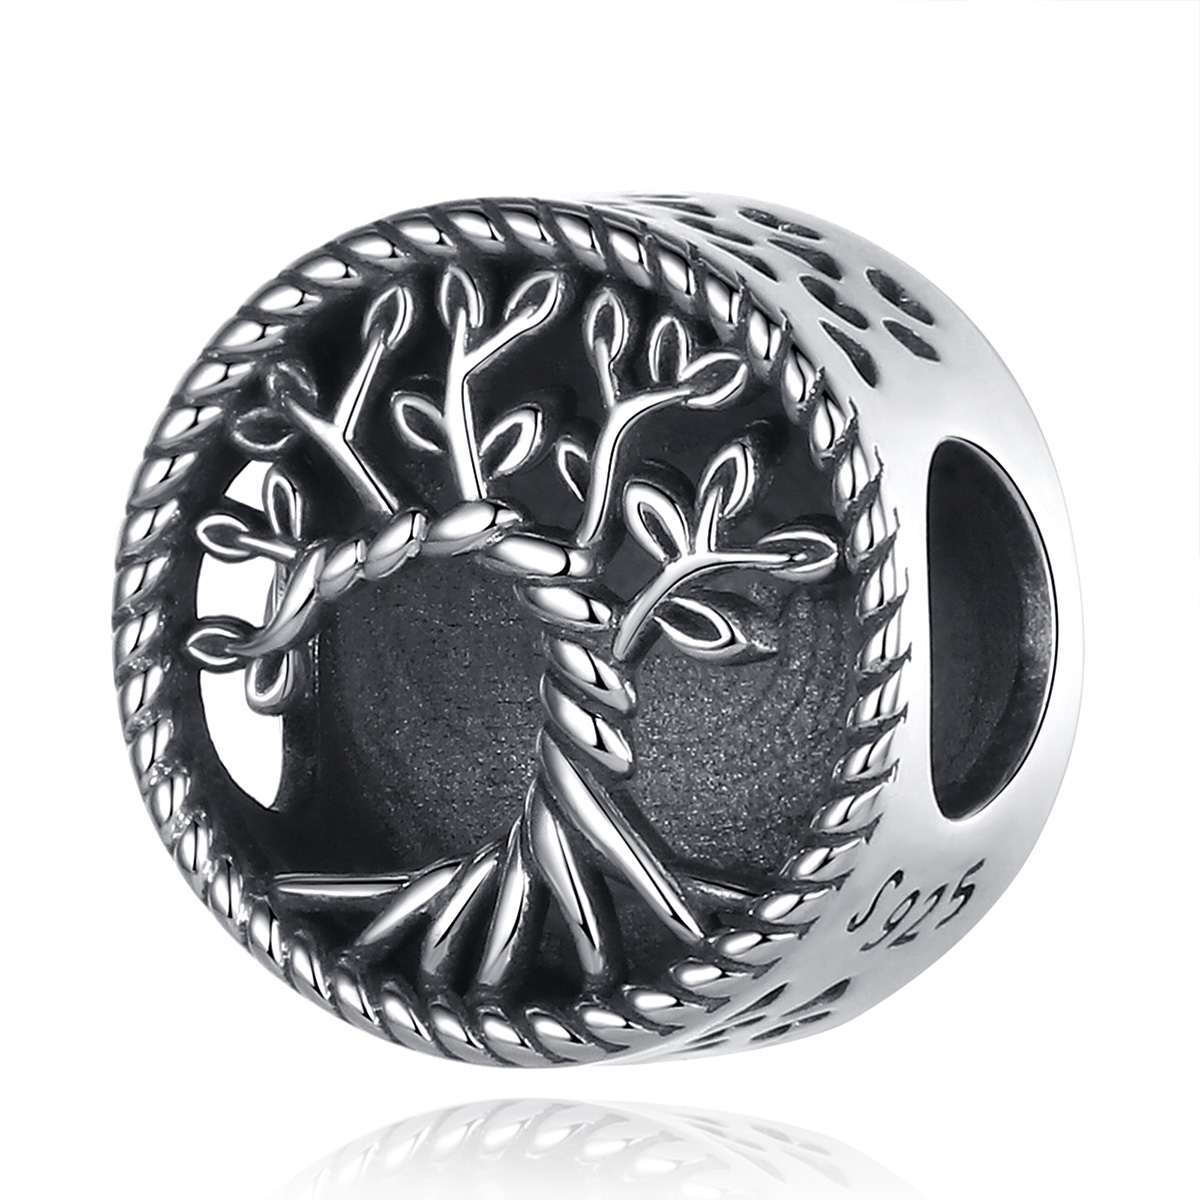 Merryshine vintage tree of life design charms 925 sterling silver jewelery beads for jewelry making